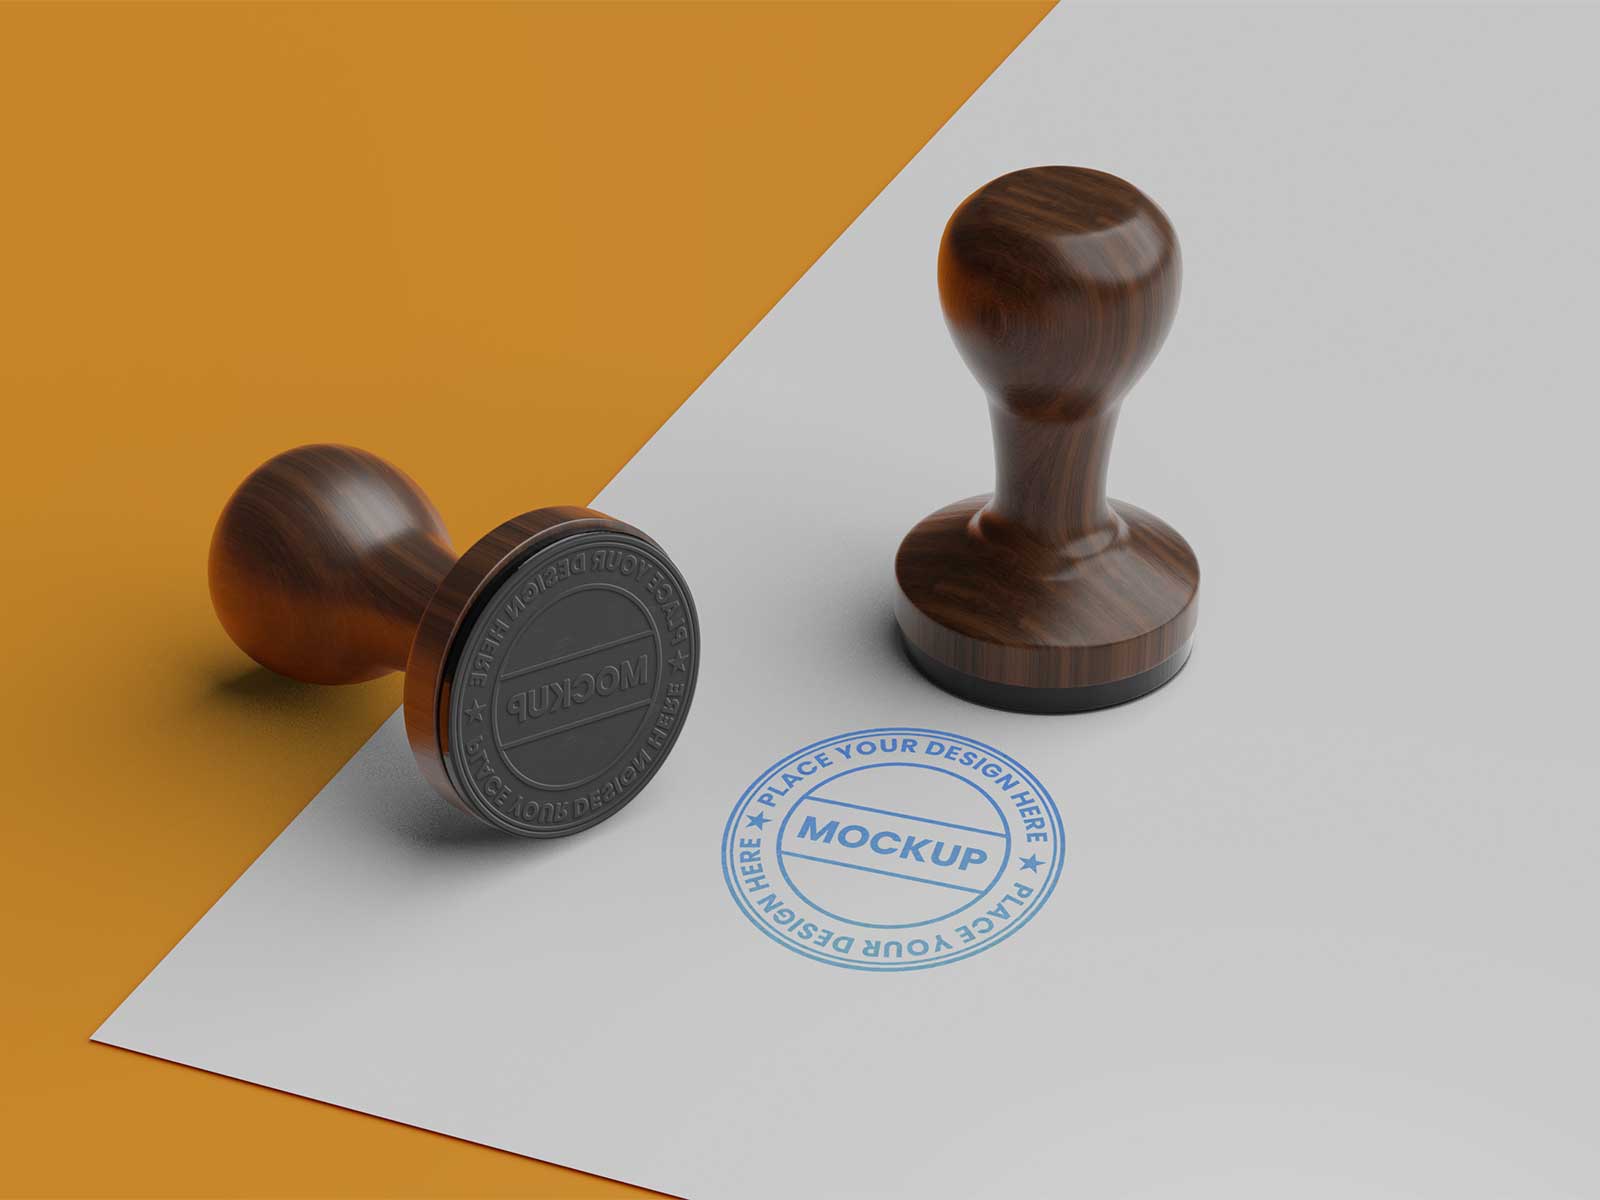 Free Rubber Stamp Mockups: Add an Authentic Touch to Your Branding!